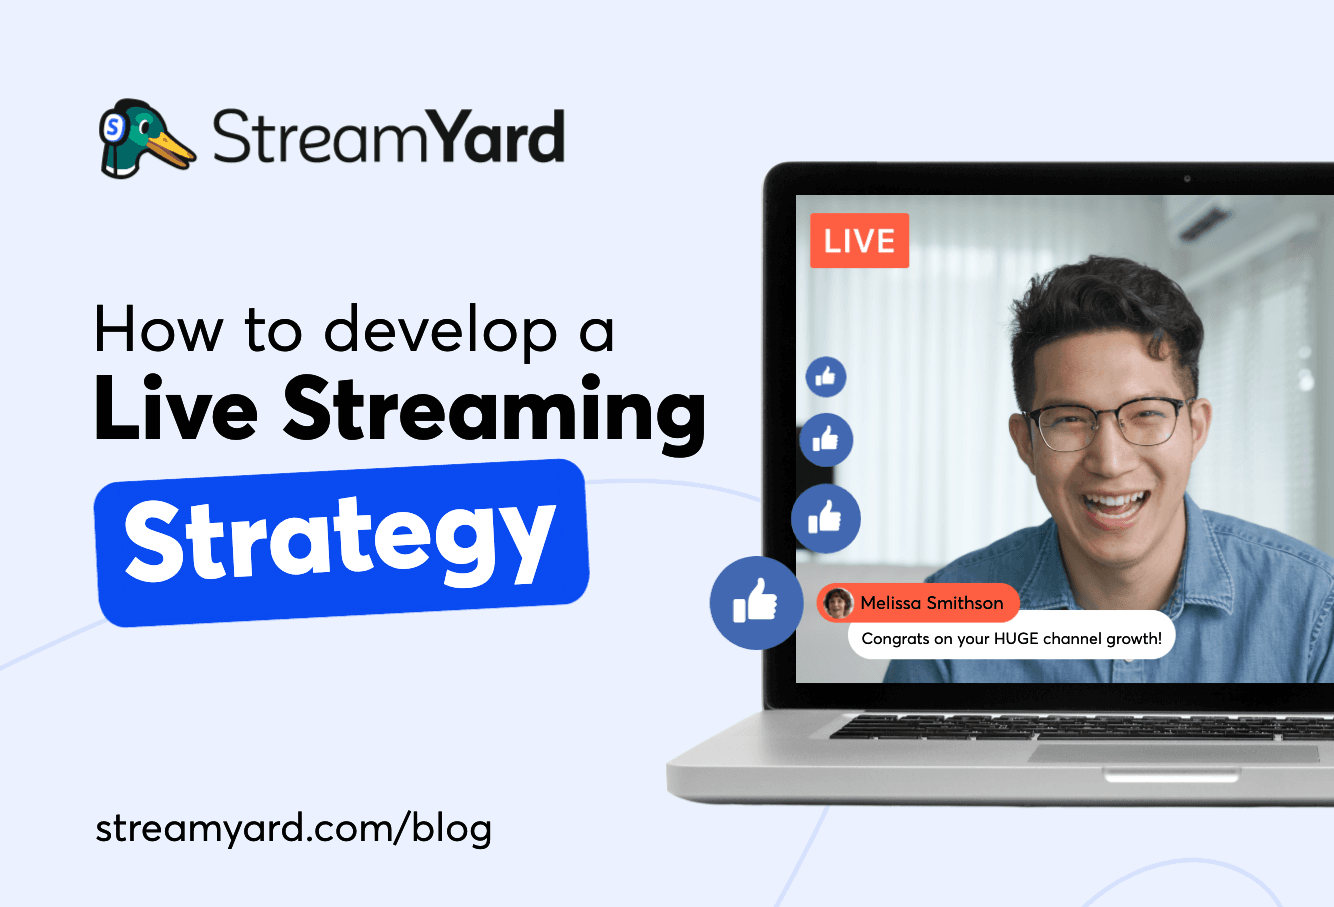 Learn how to develop a live streaming strategy for your live video show that engaged your audience.